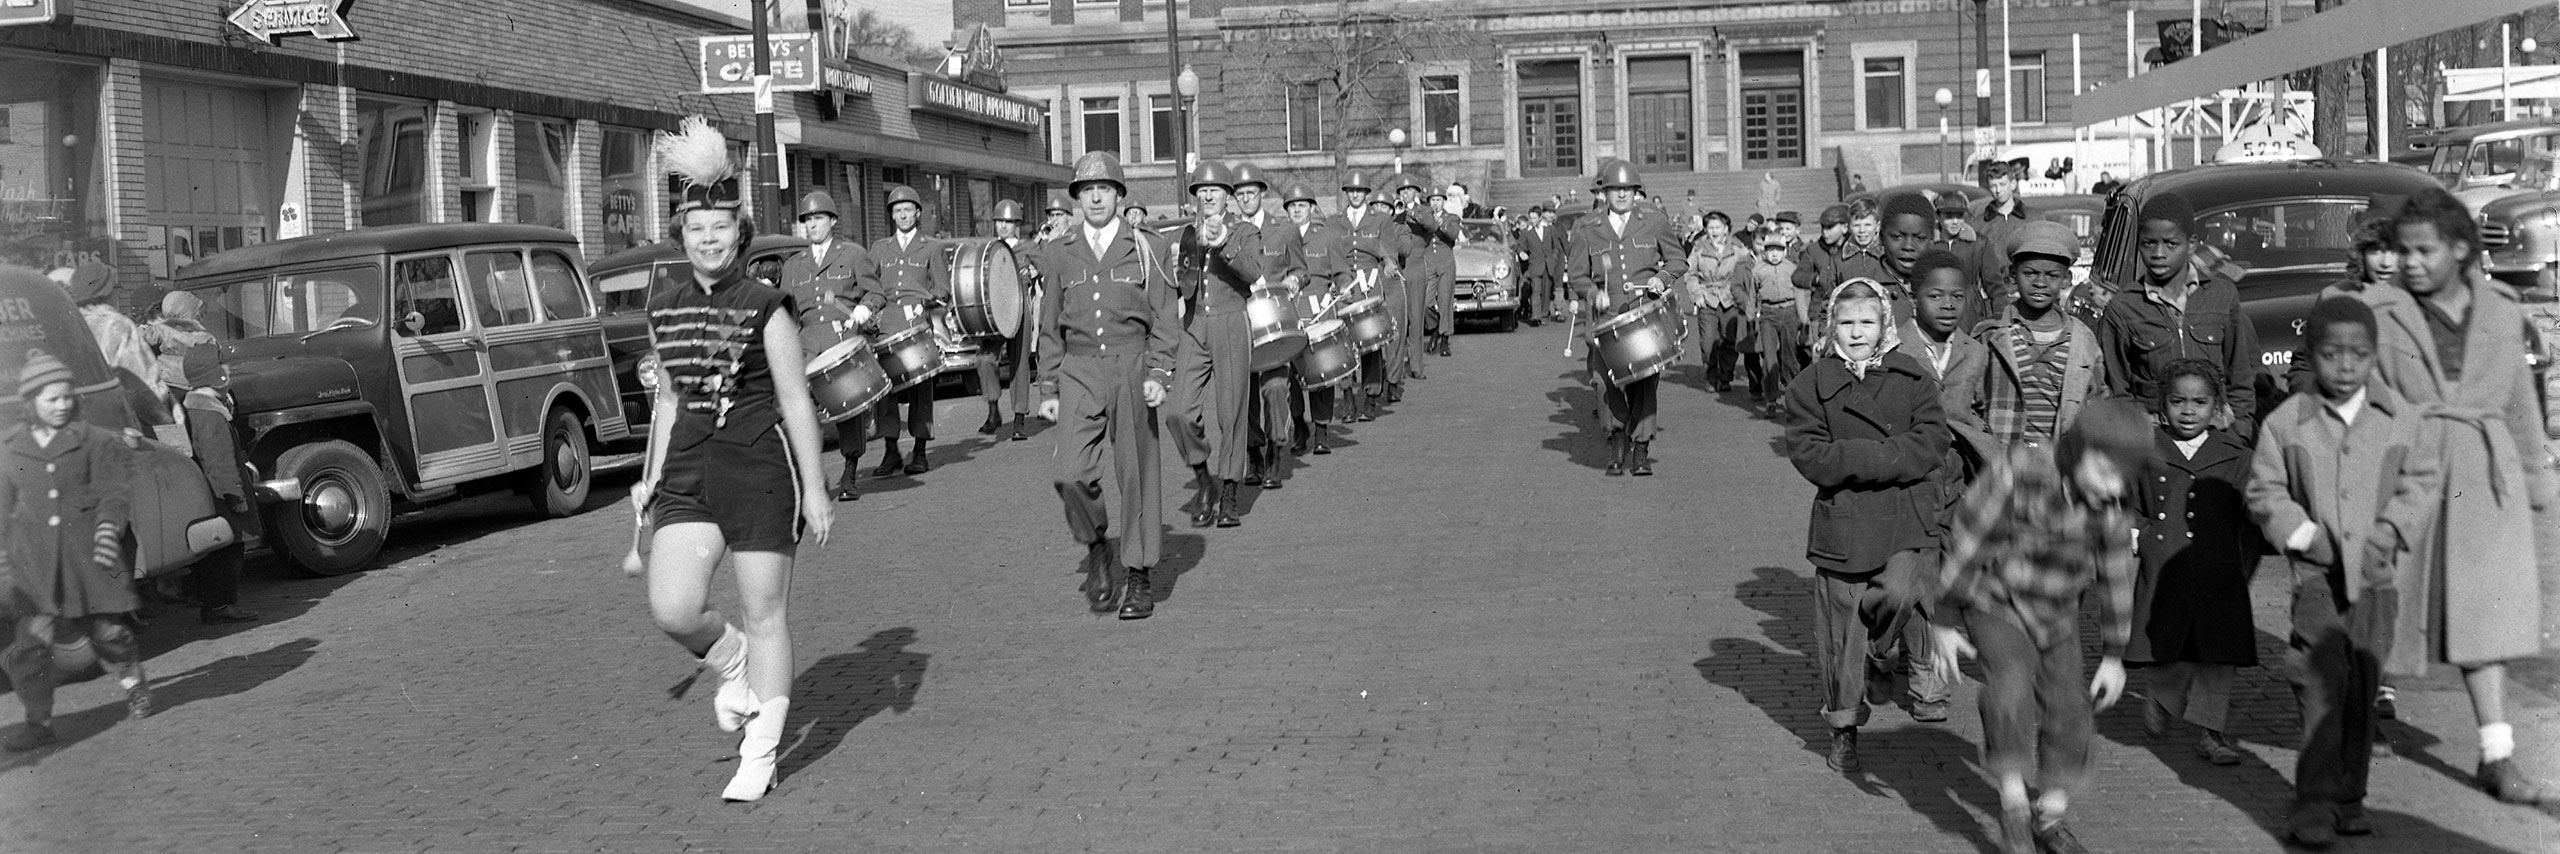 Black and white photograph of Santa Claus Parage with marching band and children